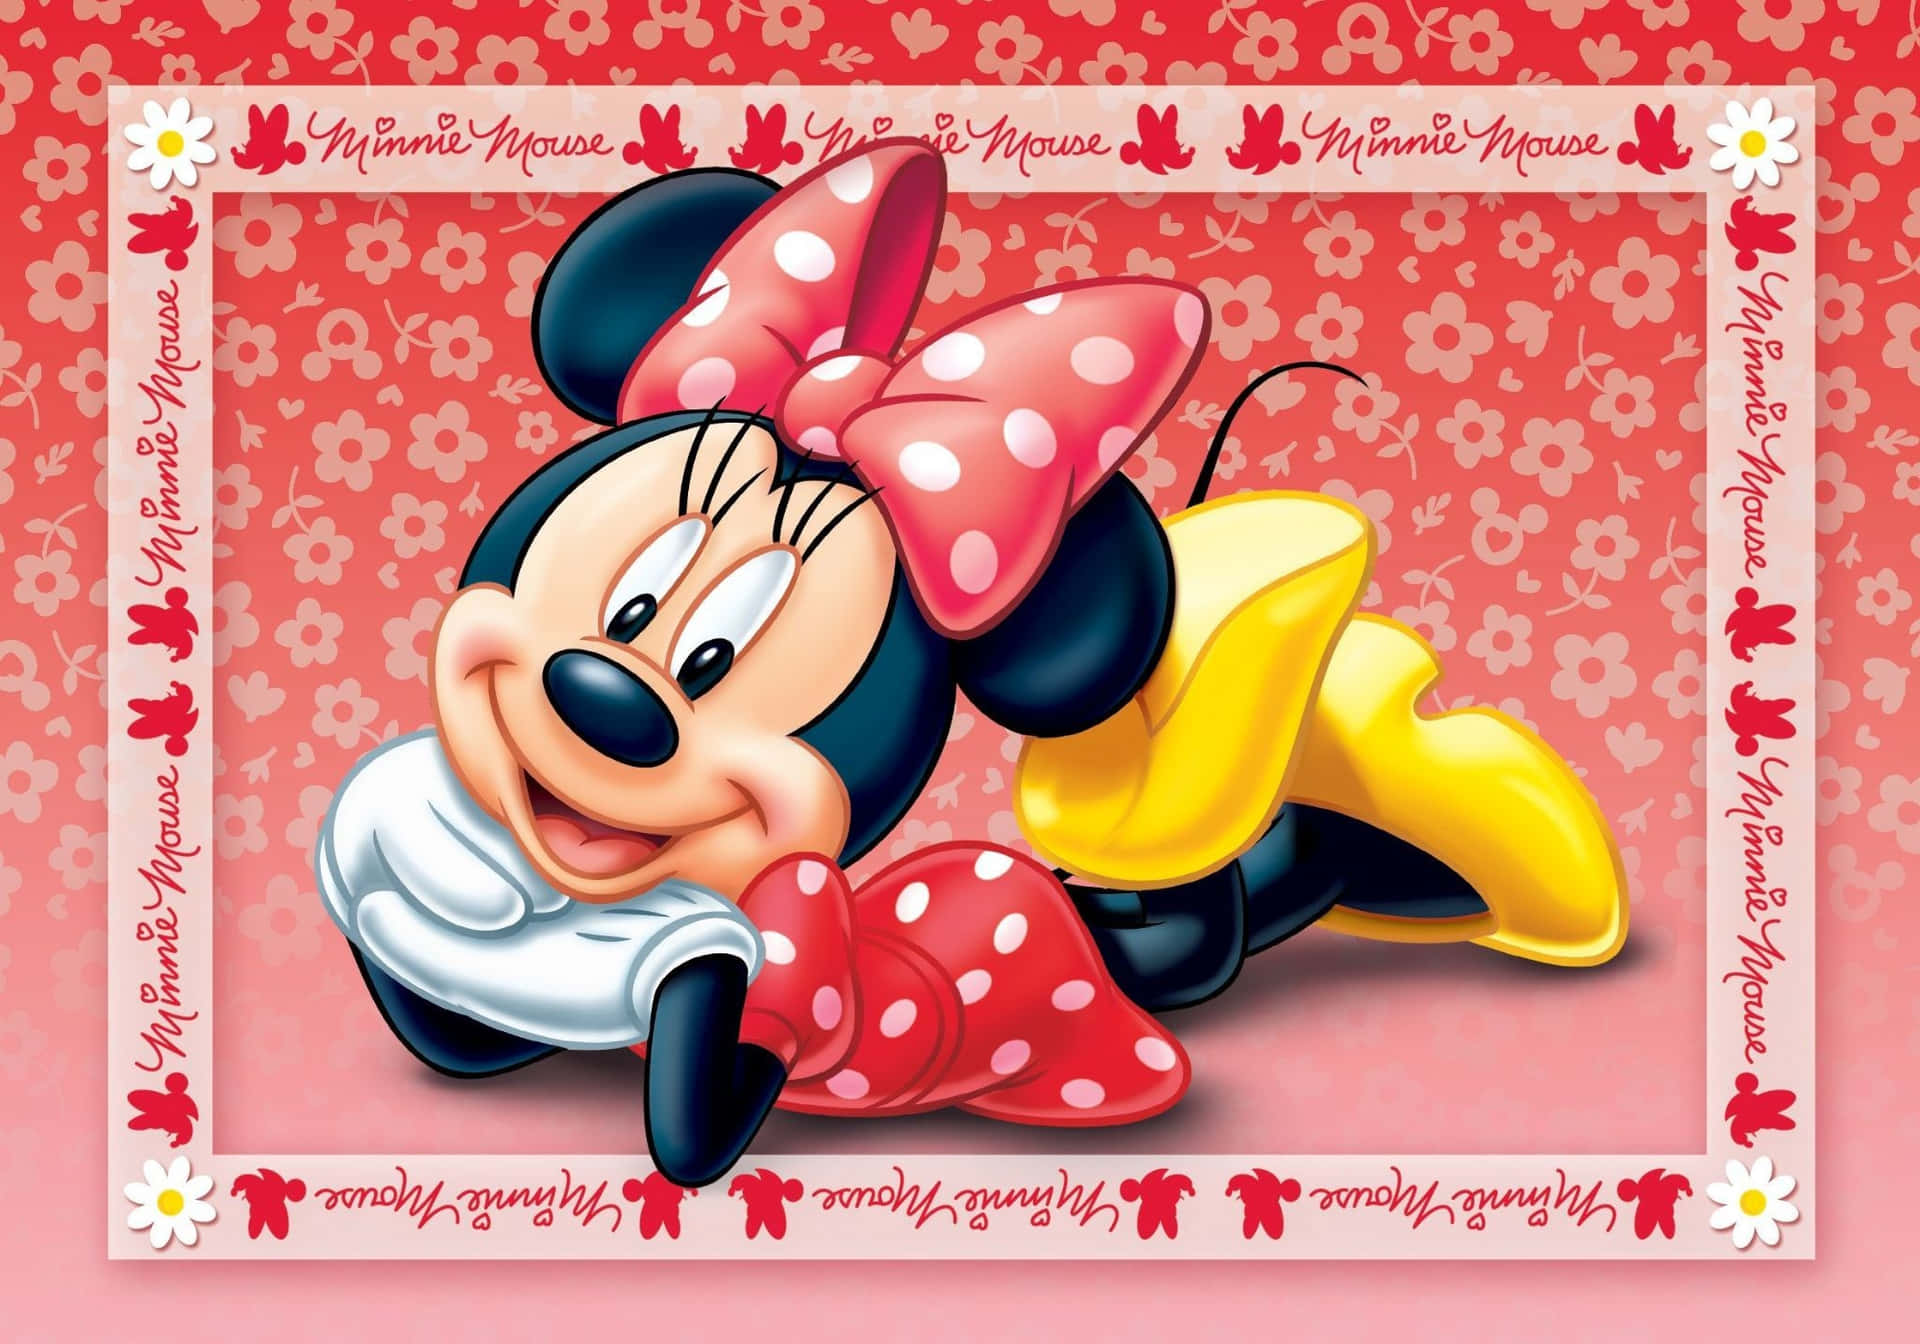 Have a magical day with Minnie Mouse